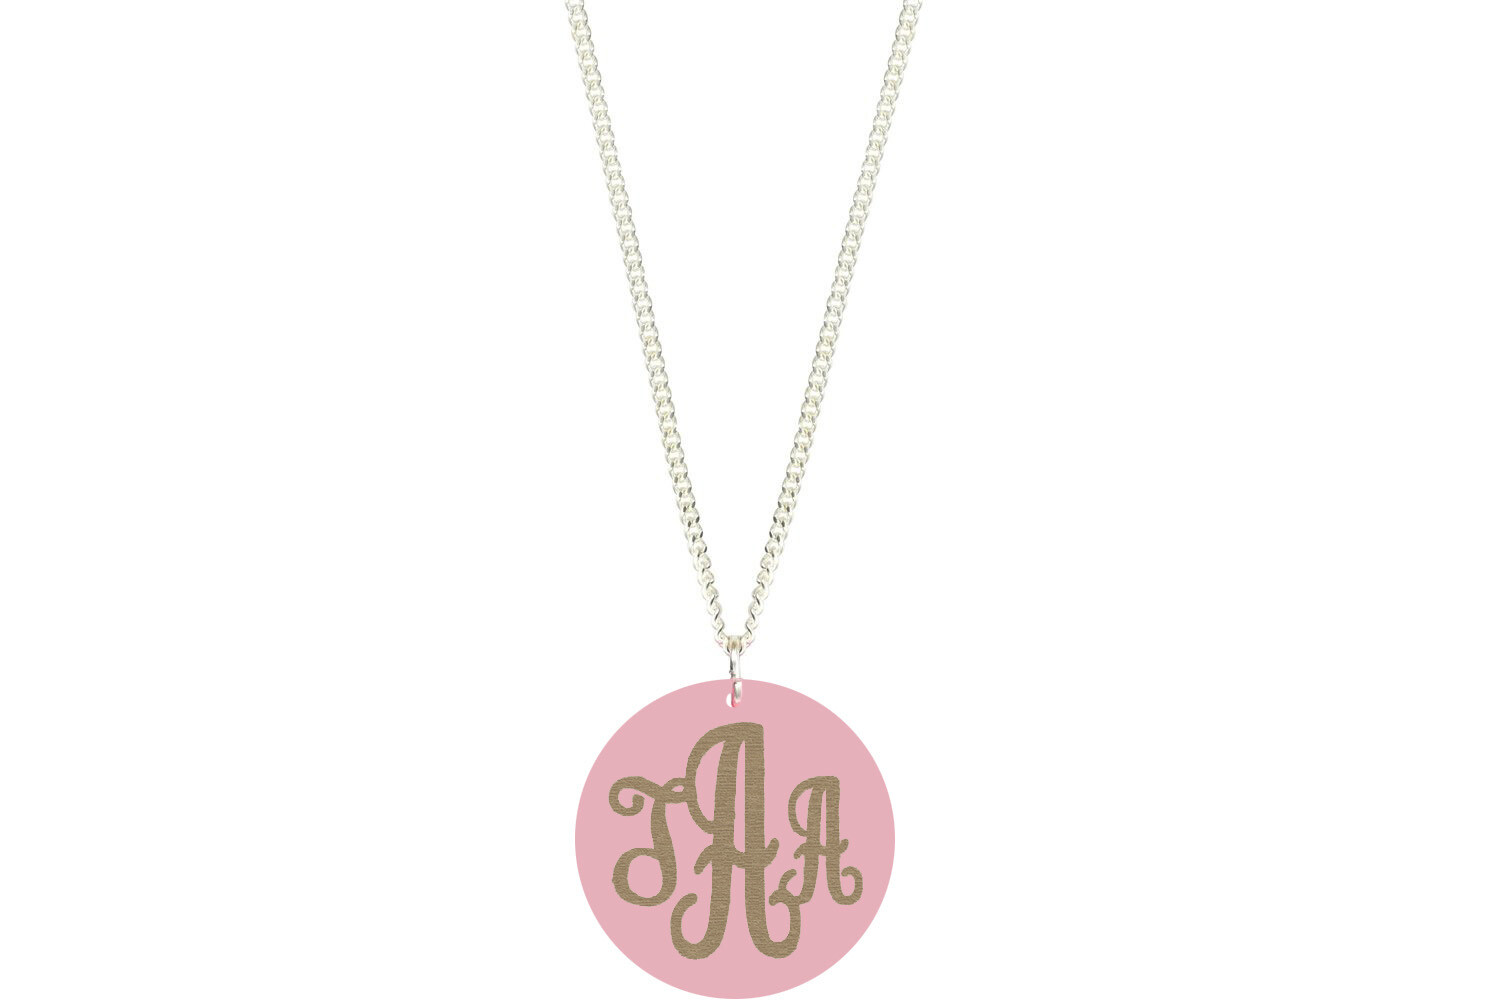 Traditional Monogram with Chain Necklace